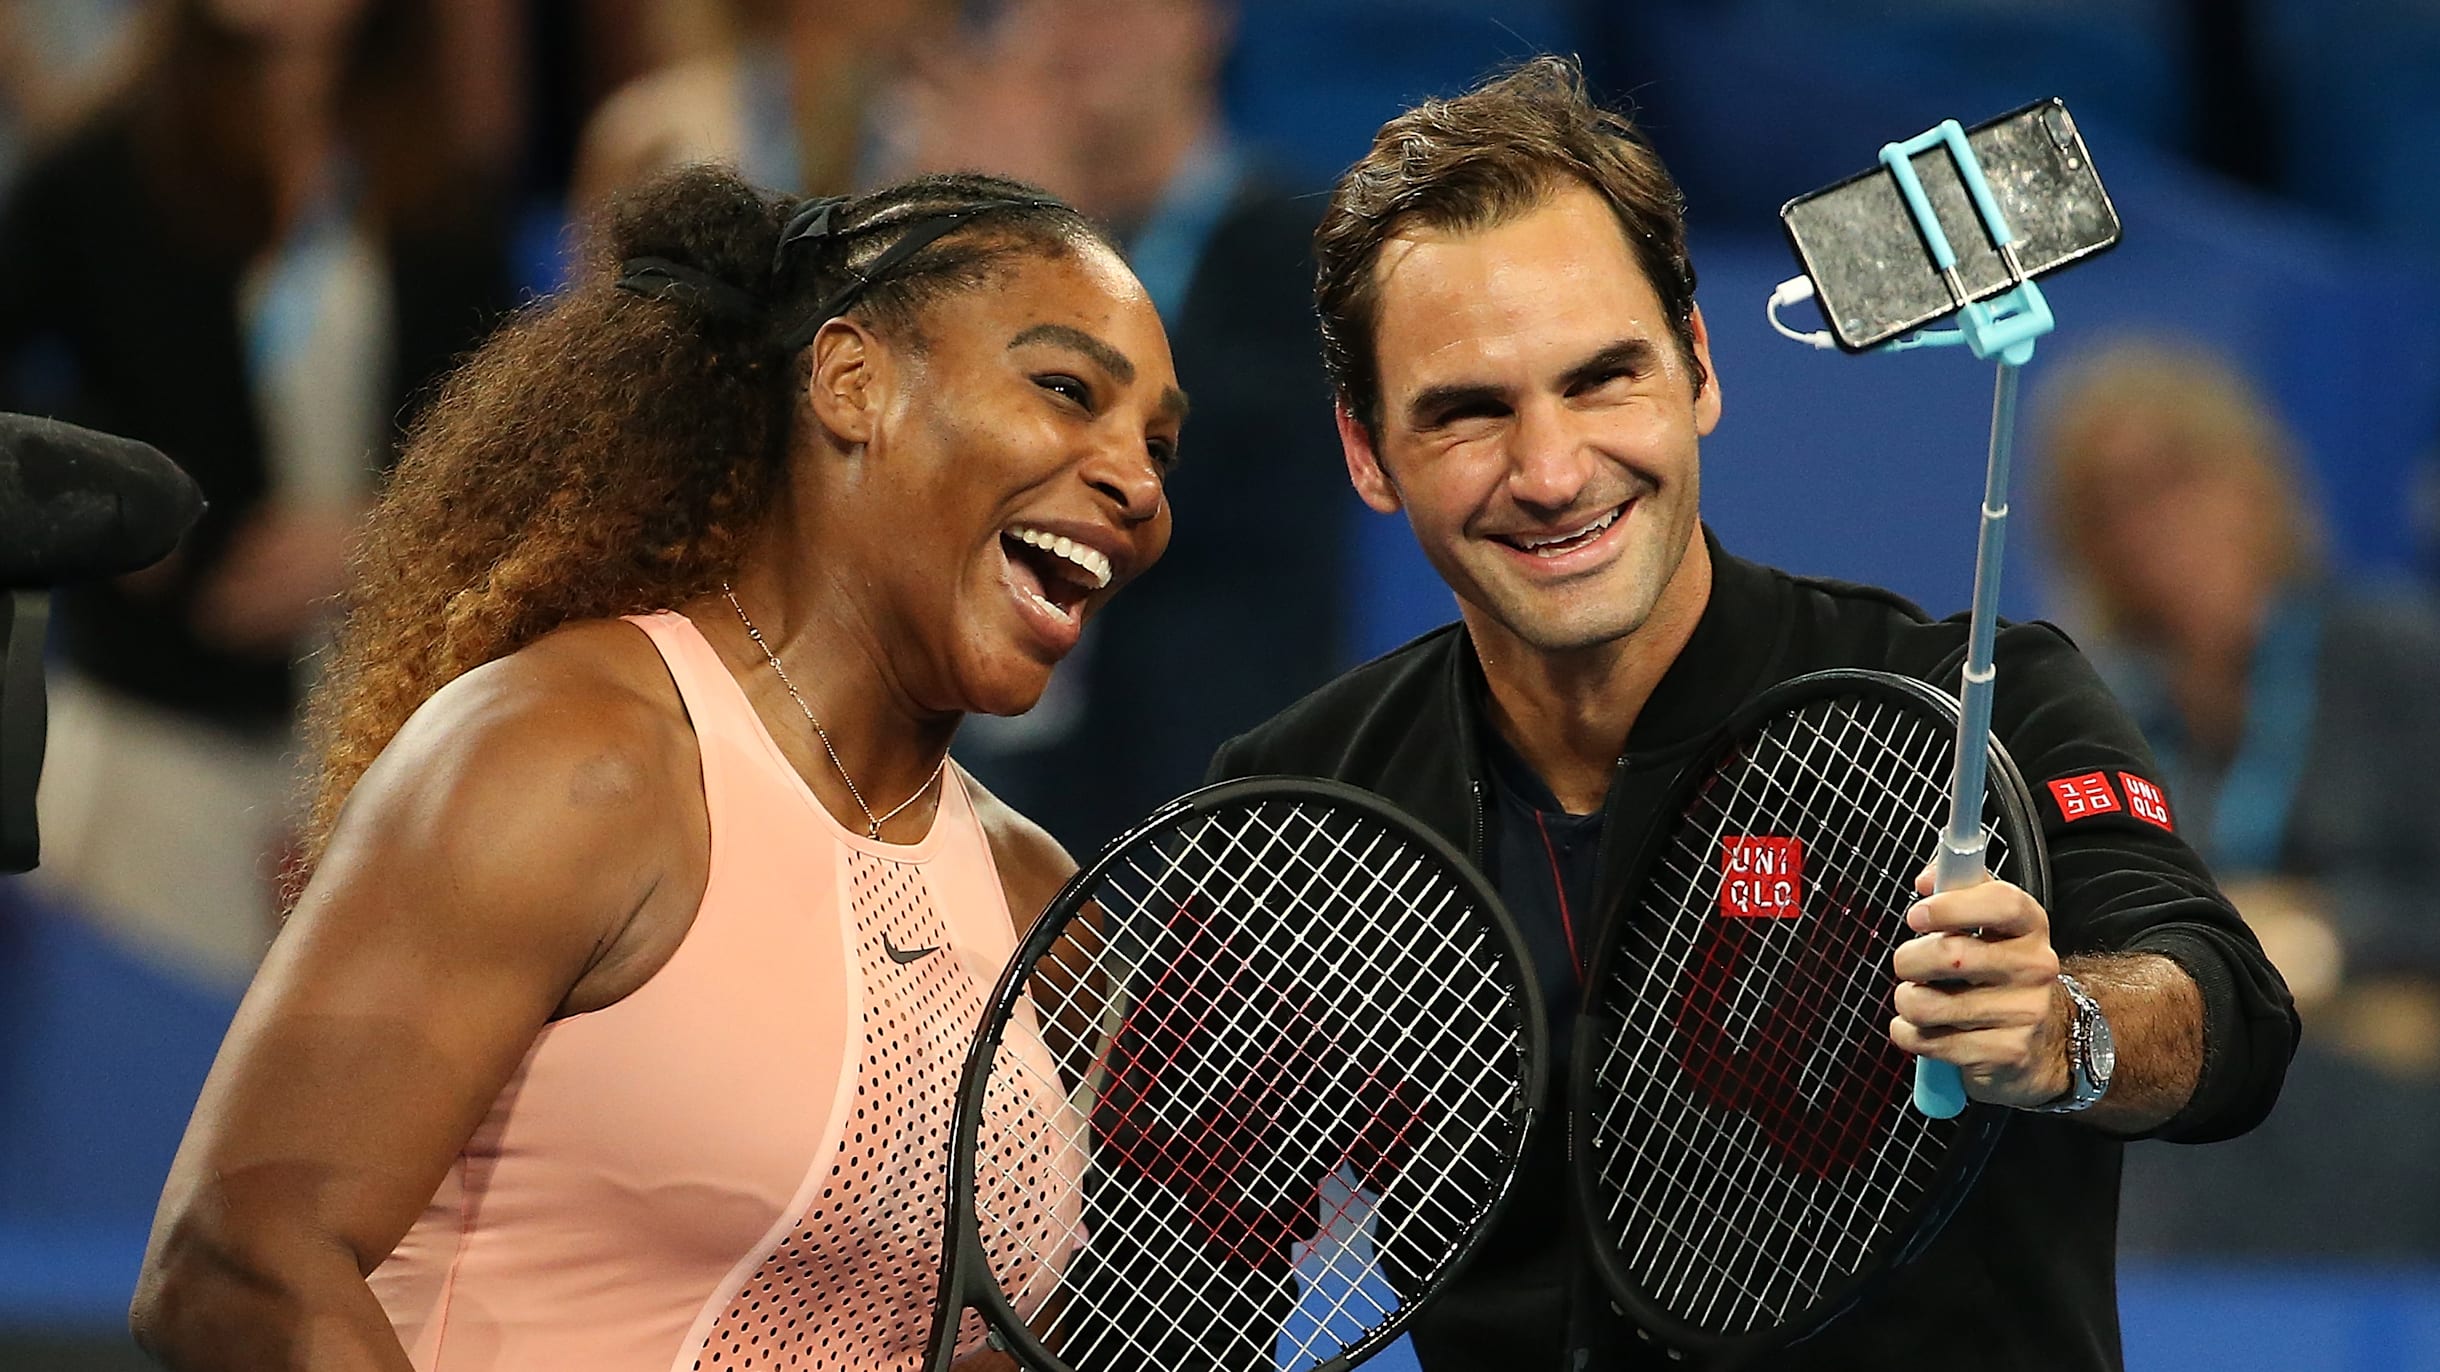 Best tennis players in the world From Roger Federer to Serena Williams